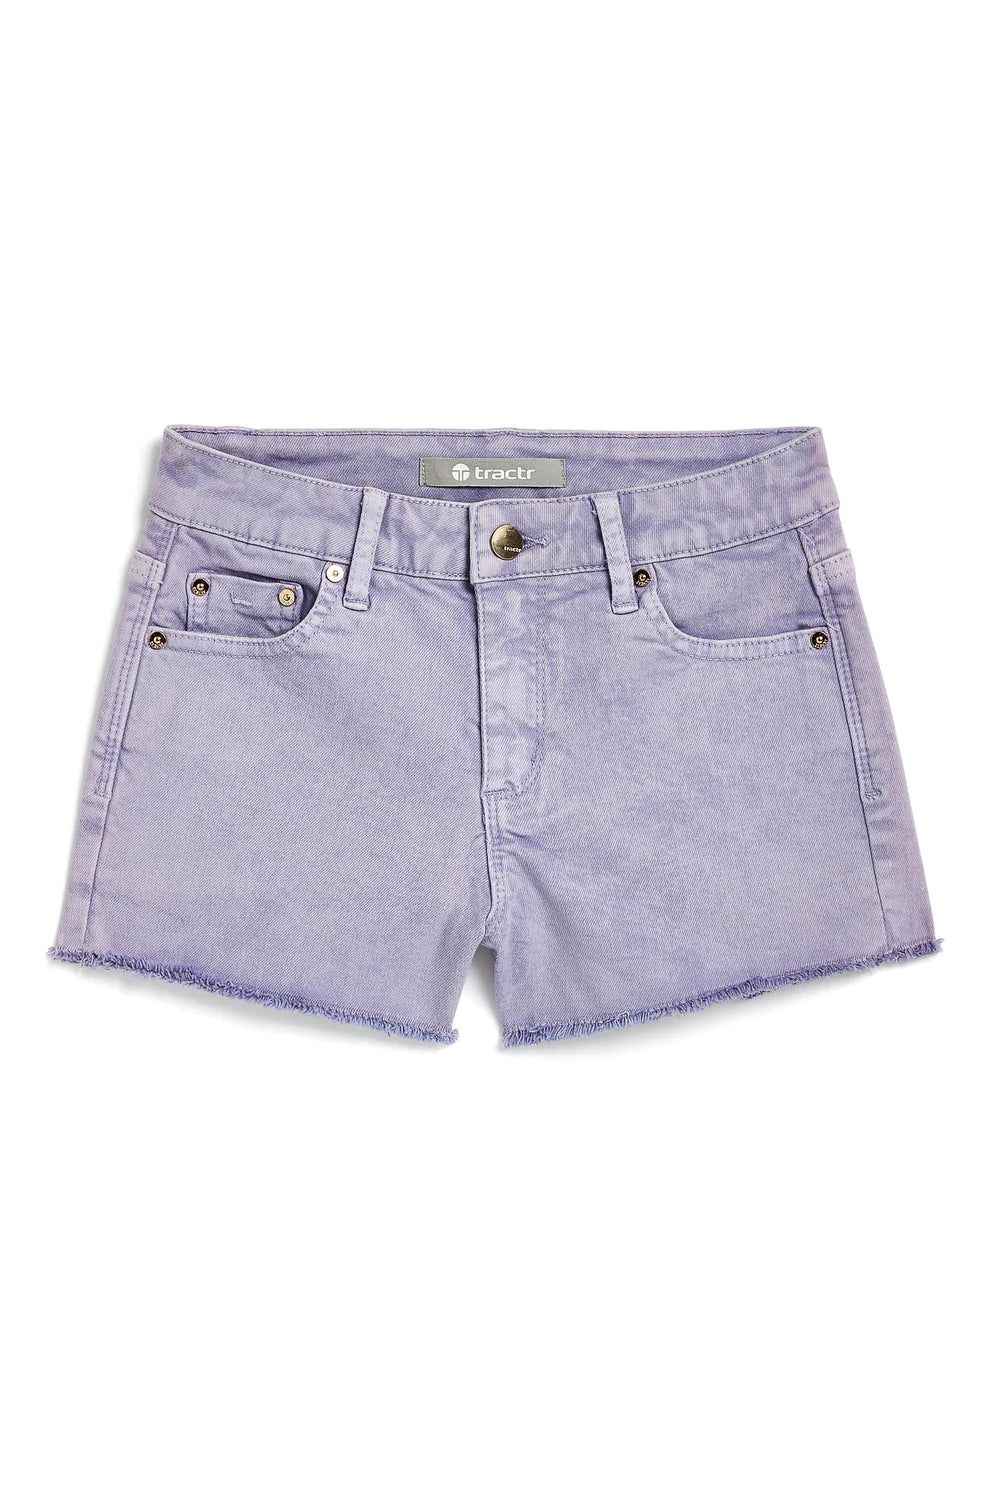 Brittany Shorts in Wisteria